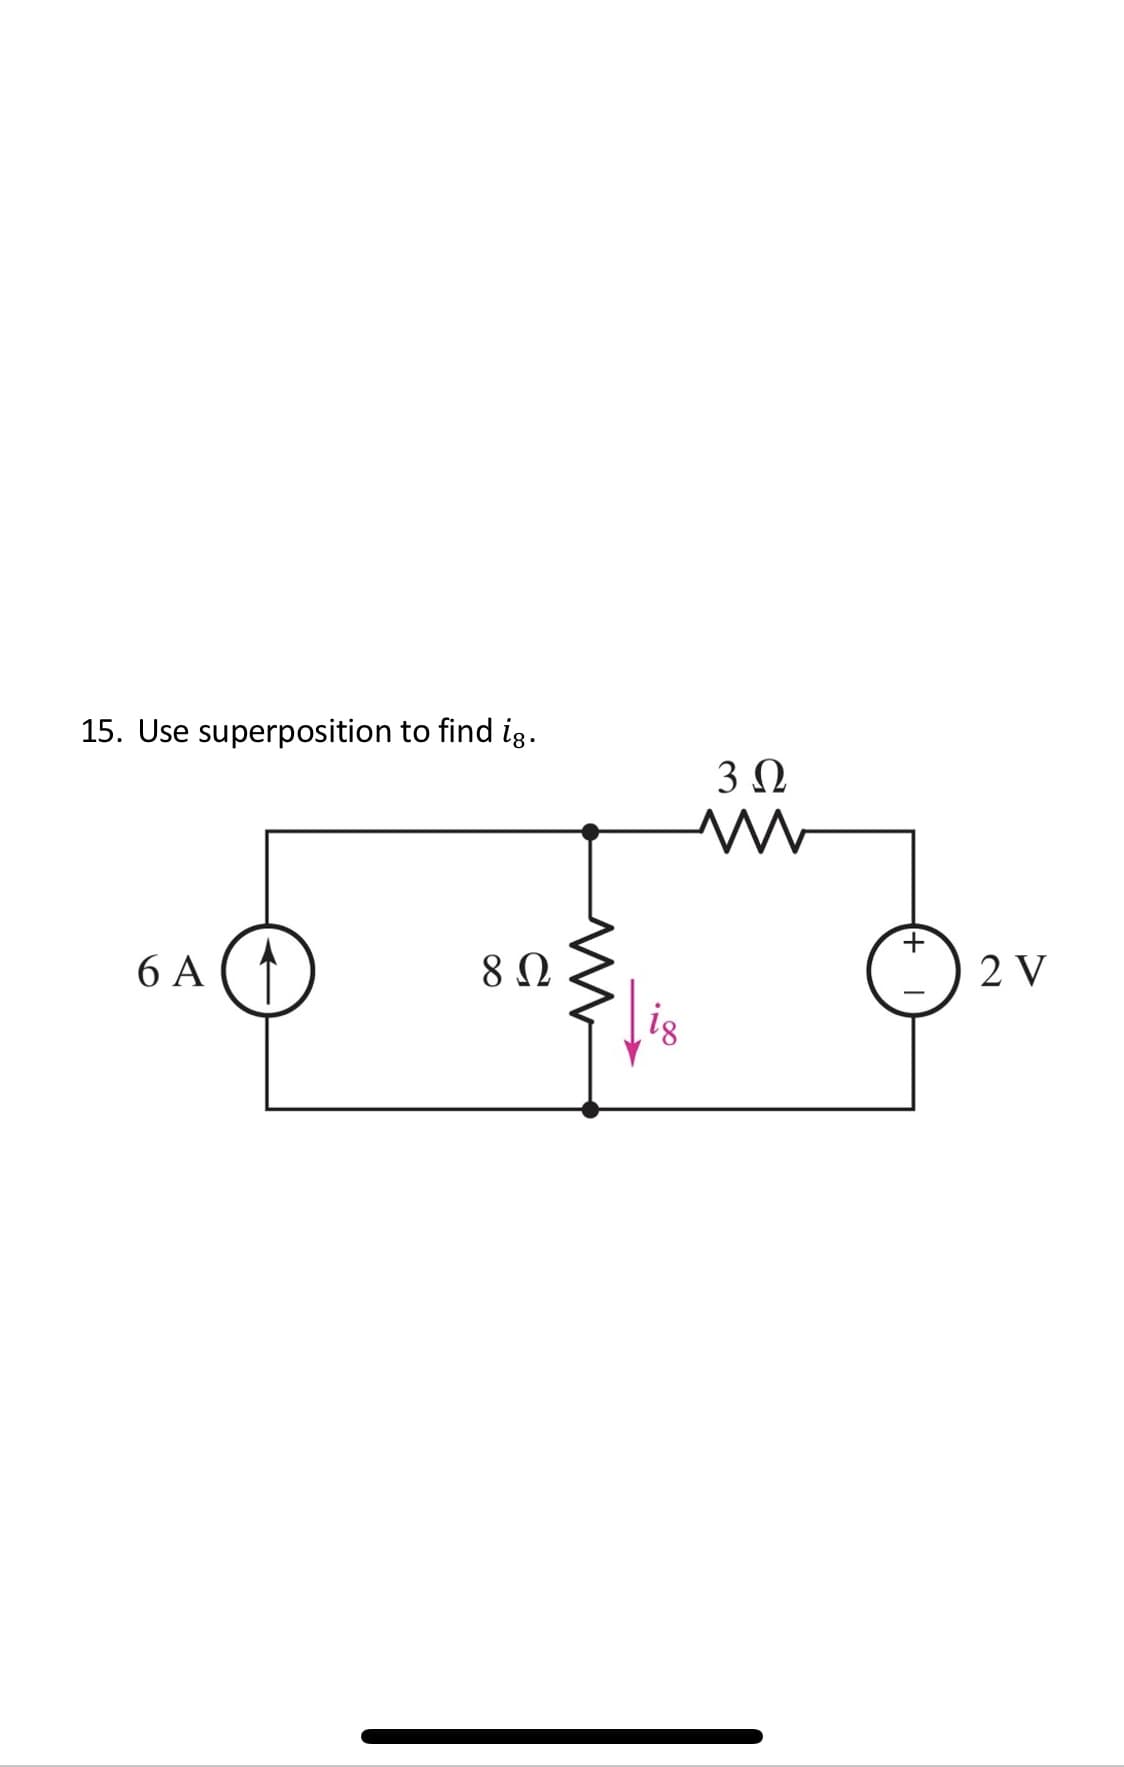 15. Use superposition to find ig.
3Ω
2 V
6 A
is
